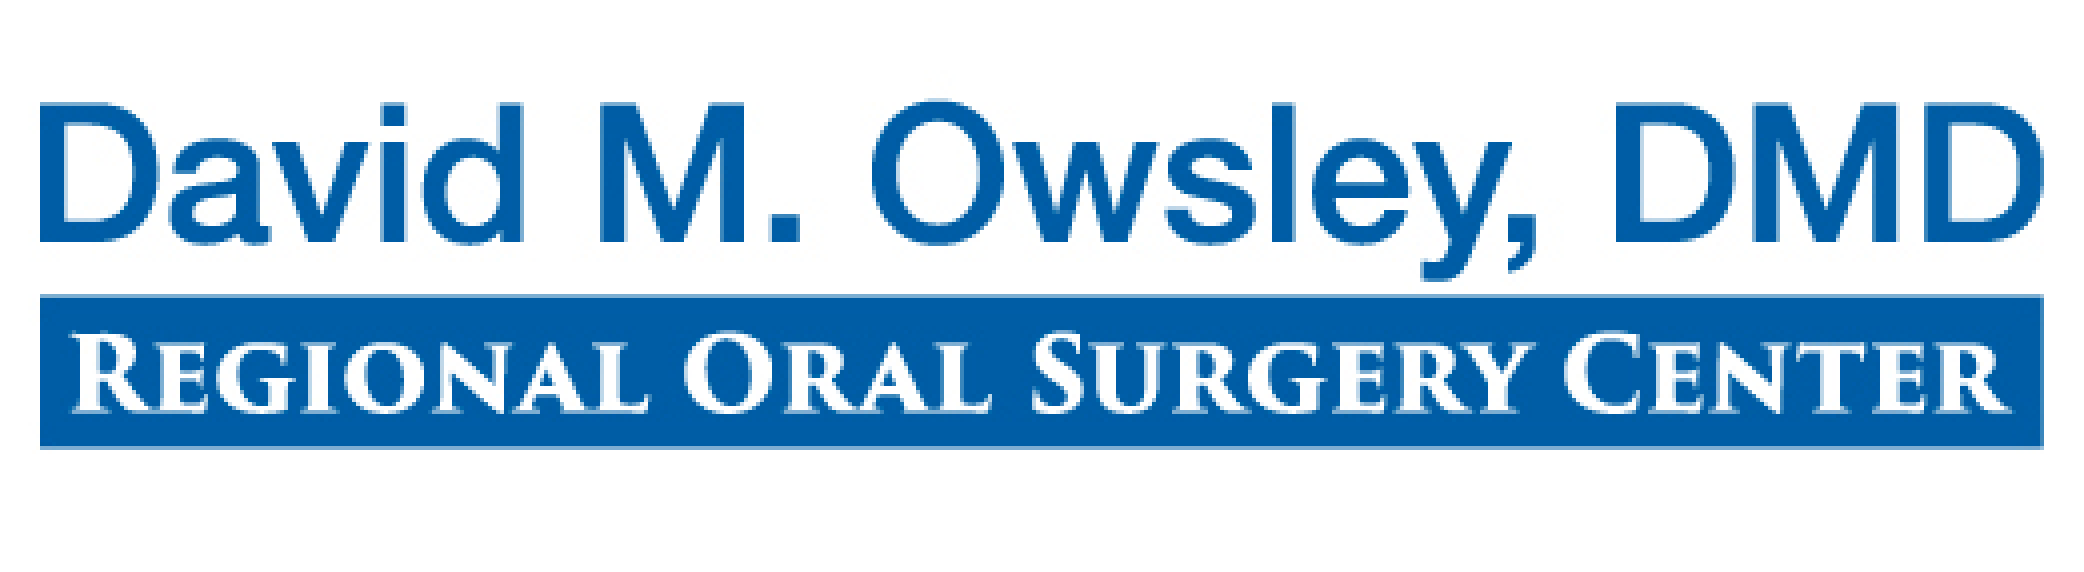 Dr. Owsley